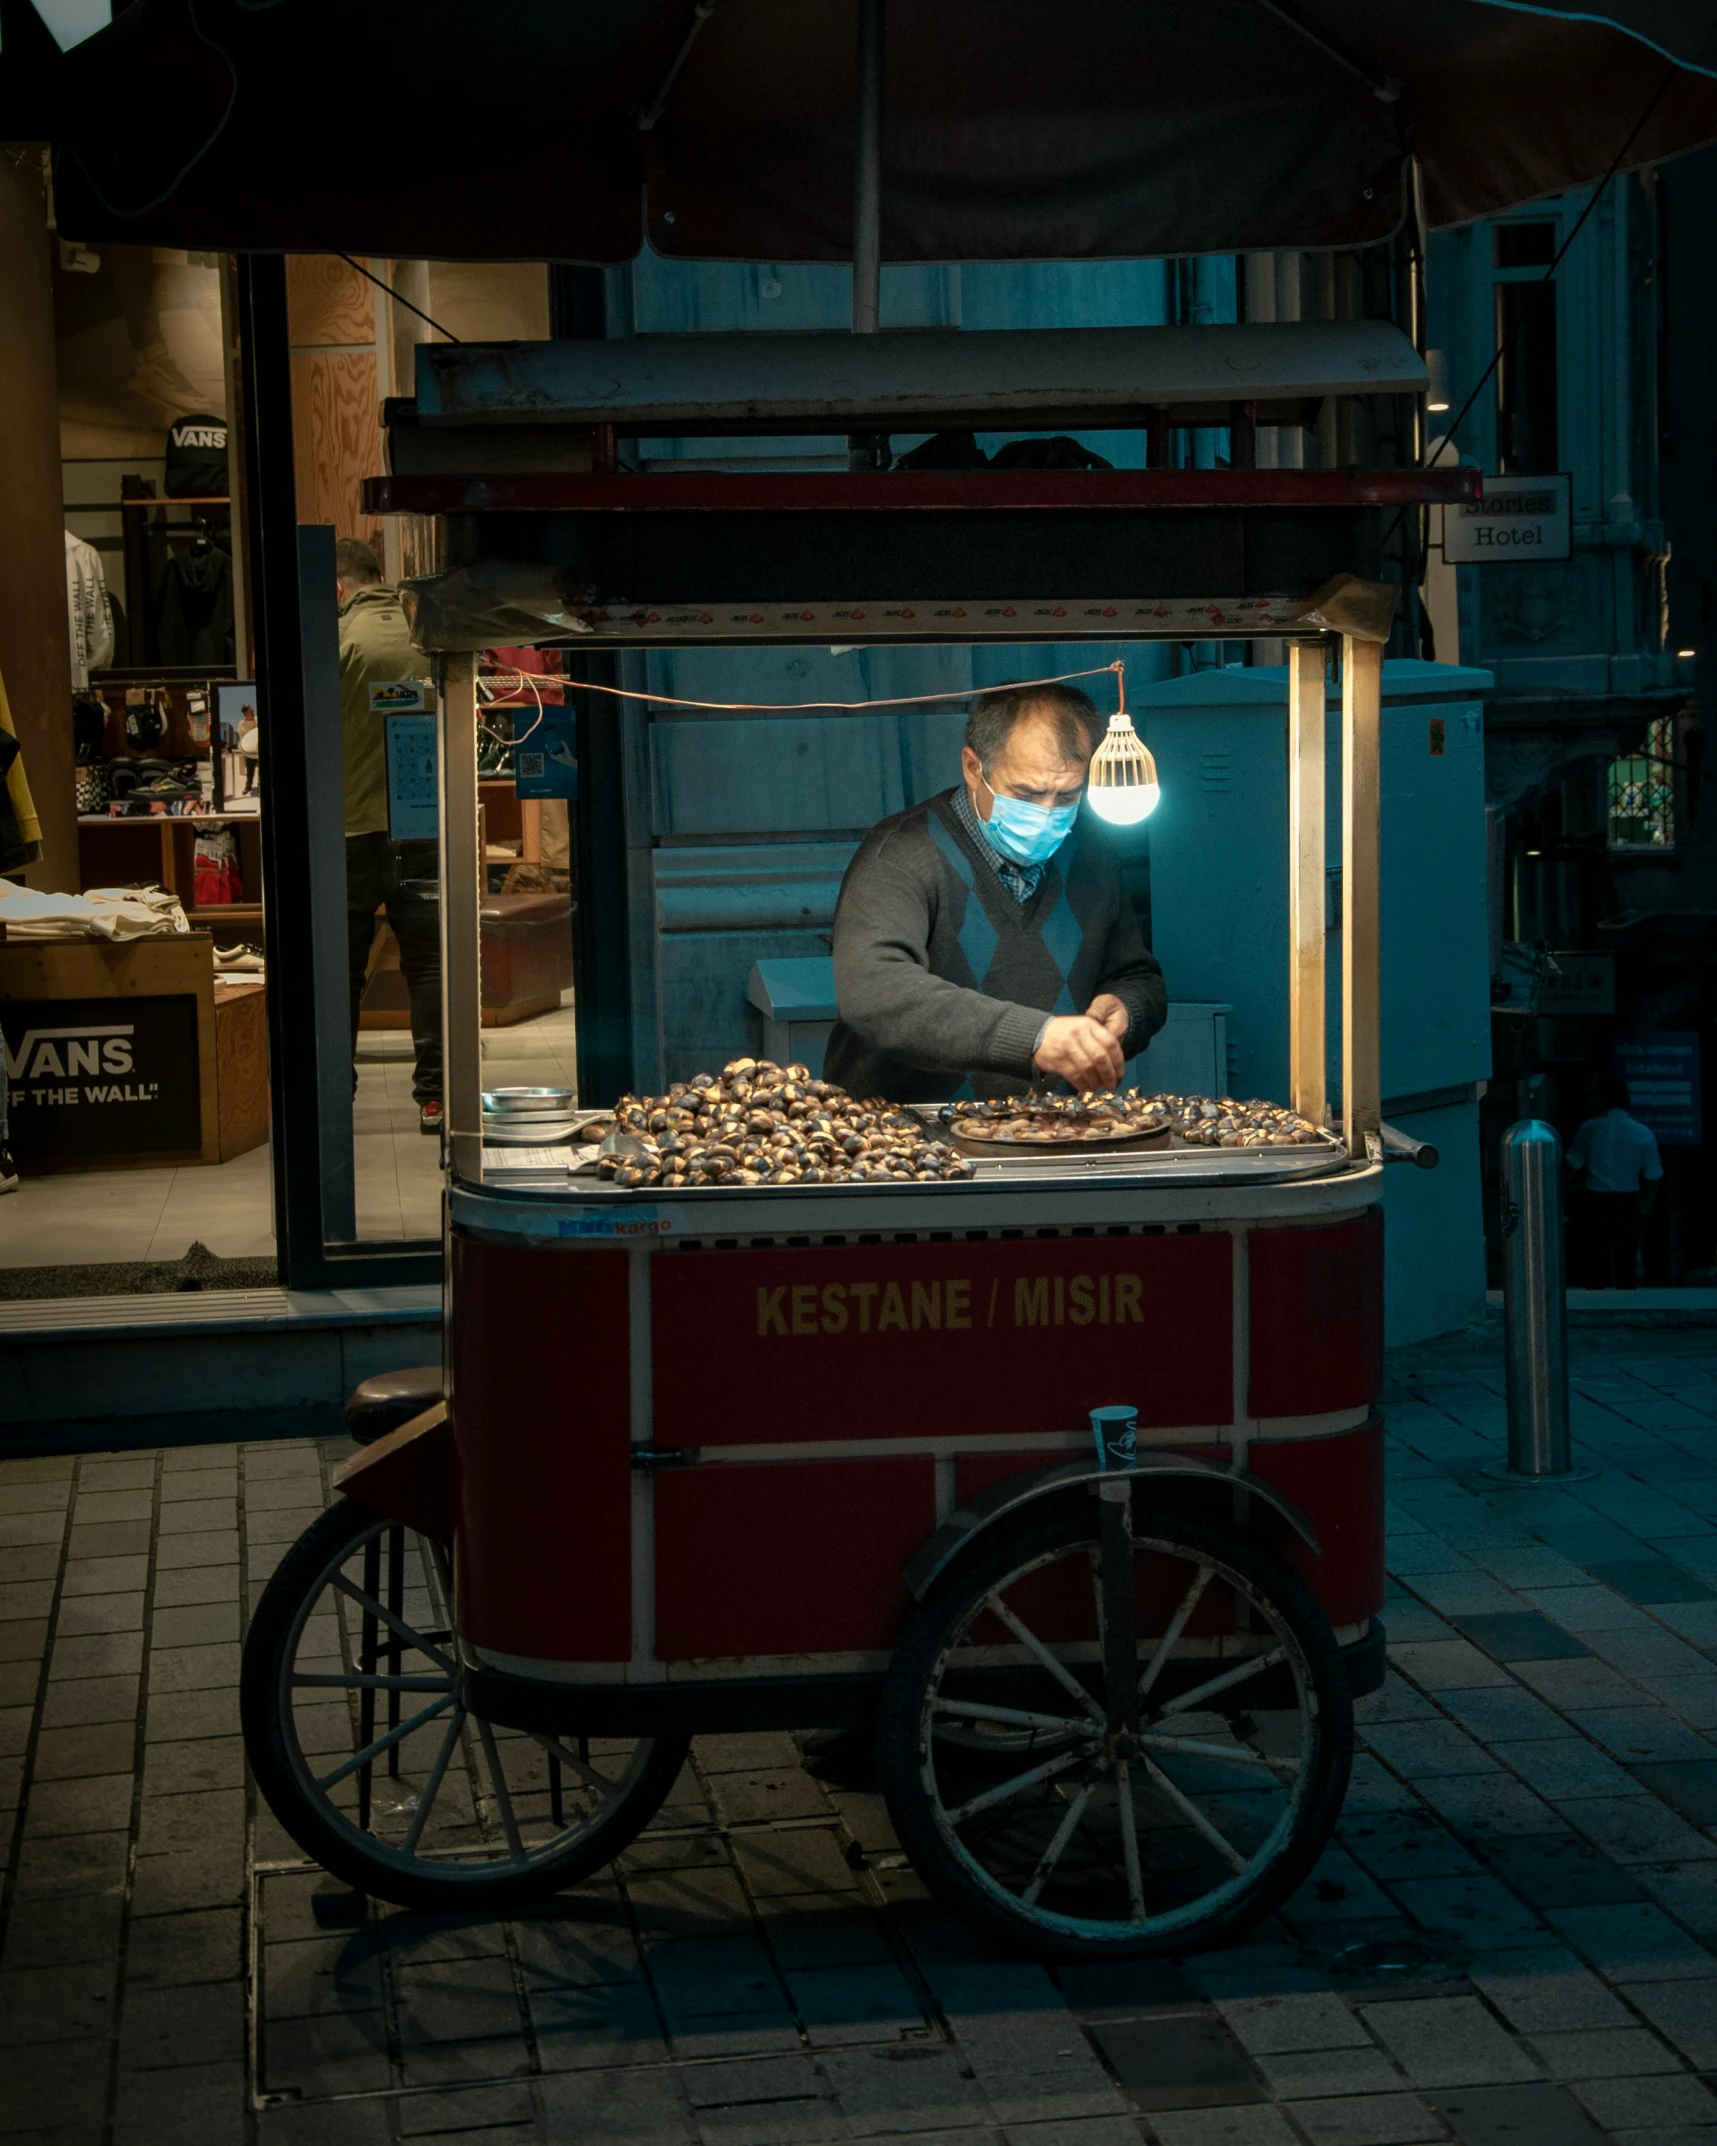 a man wearing a mask is behind a street food stand